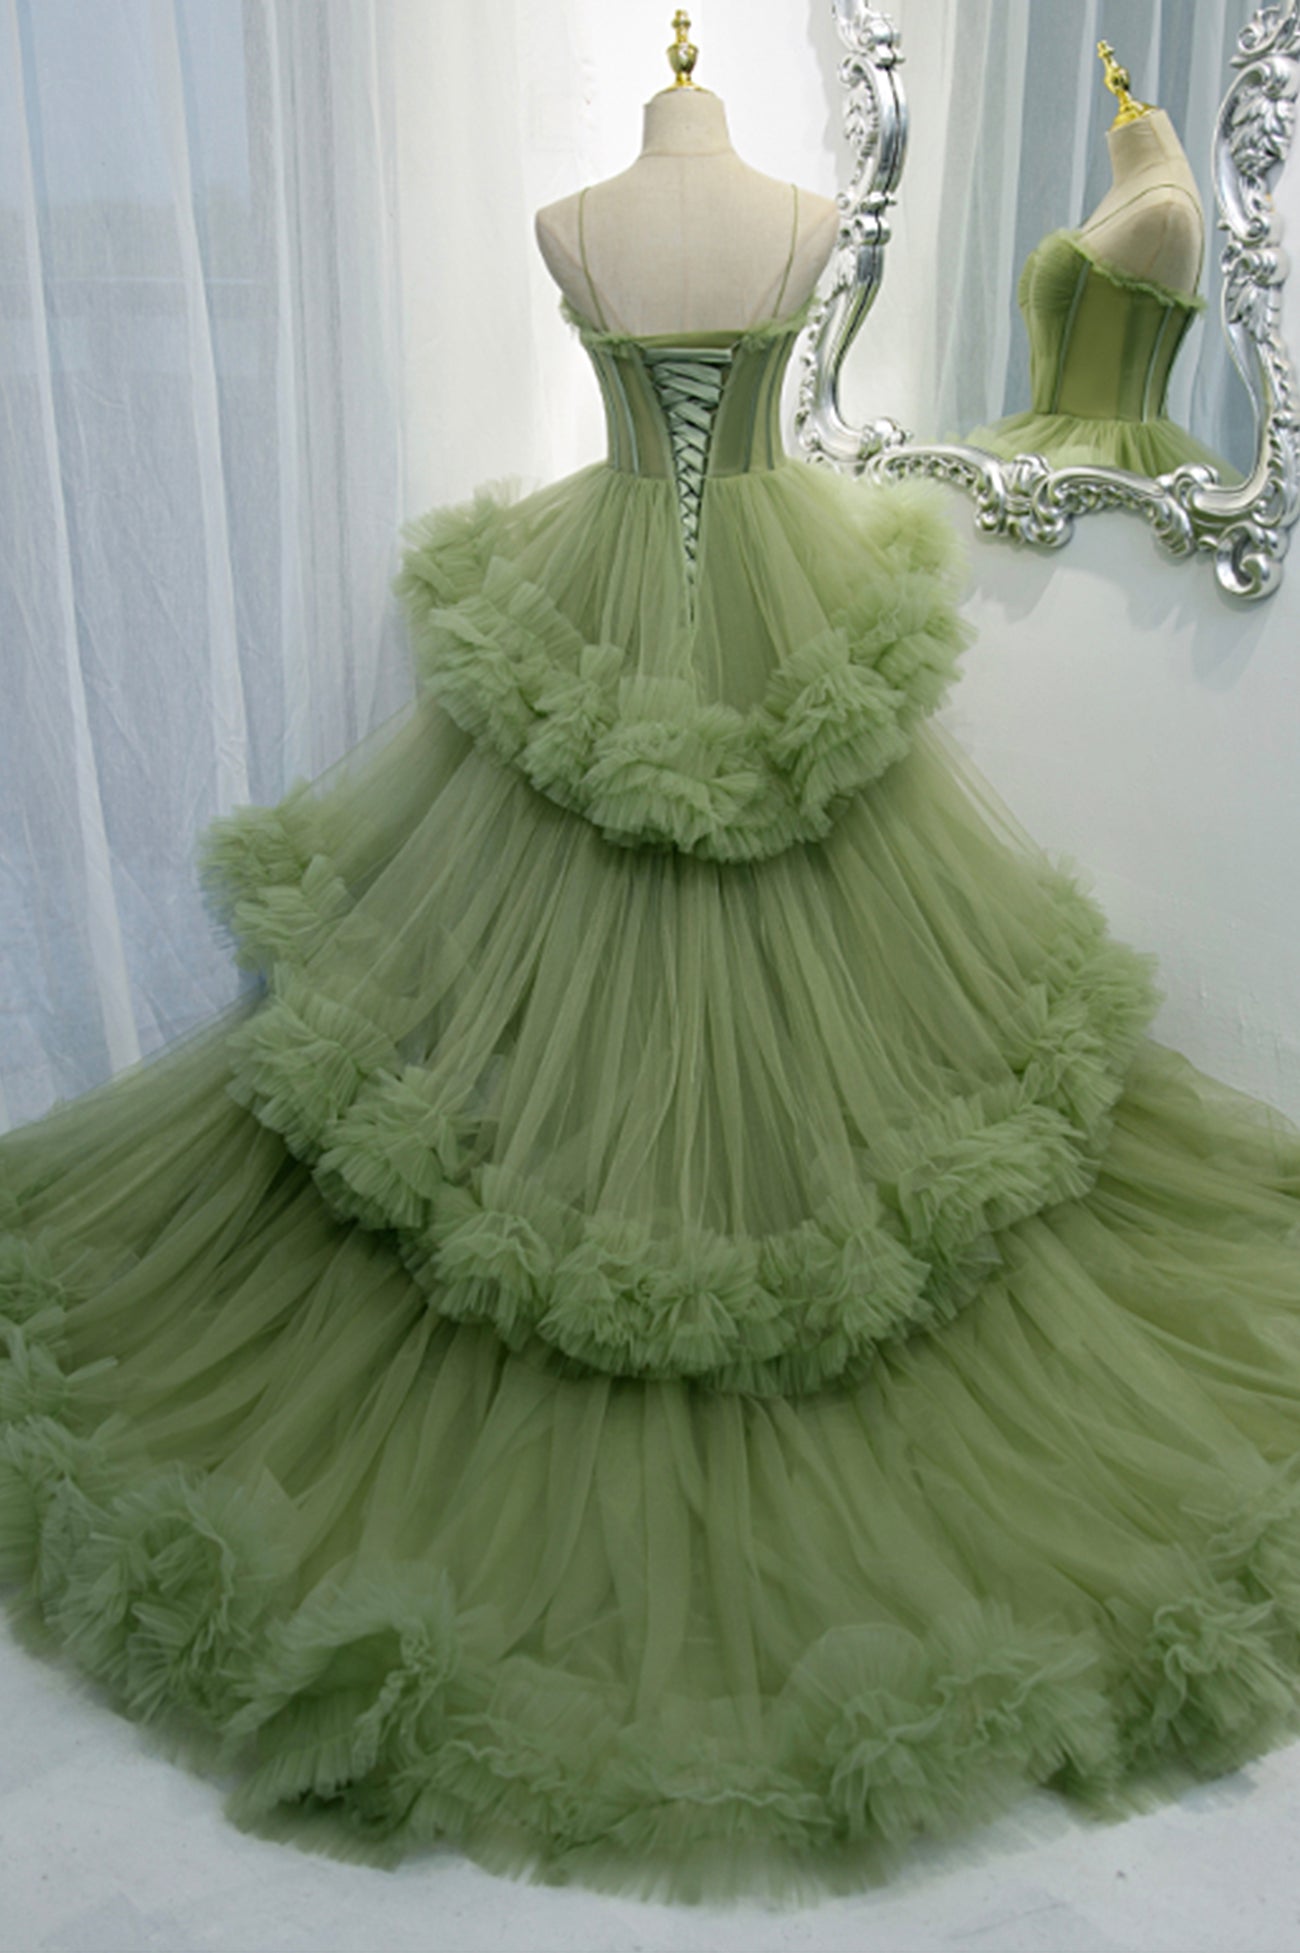 Prom Dresses For Curvy Figure, Green Tulle Long Prom Dresses, A-Line Formal Evening Dresses